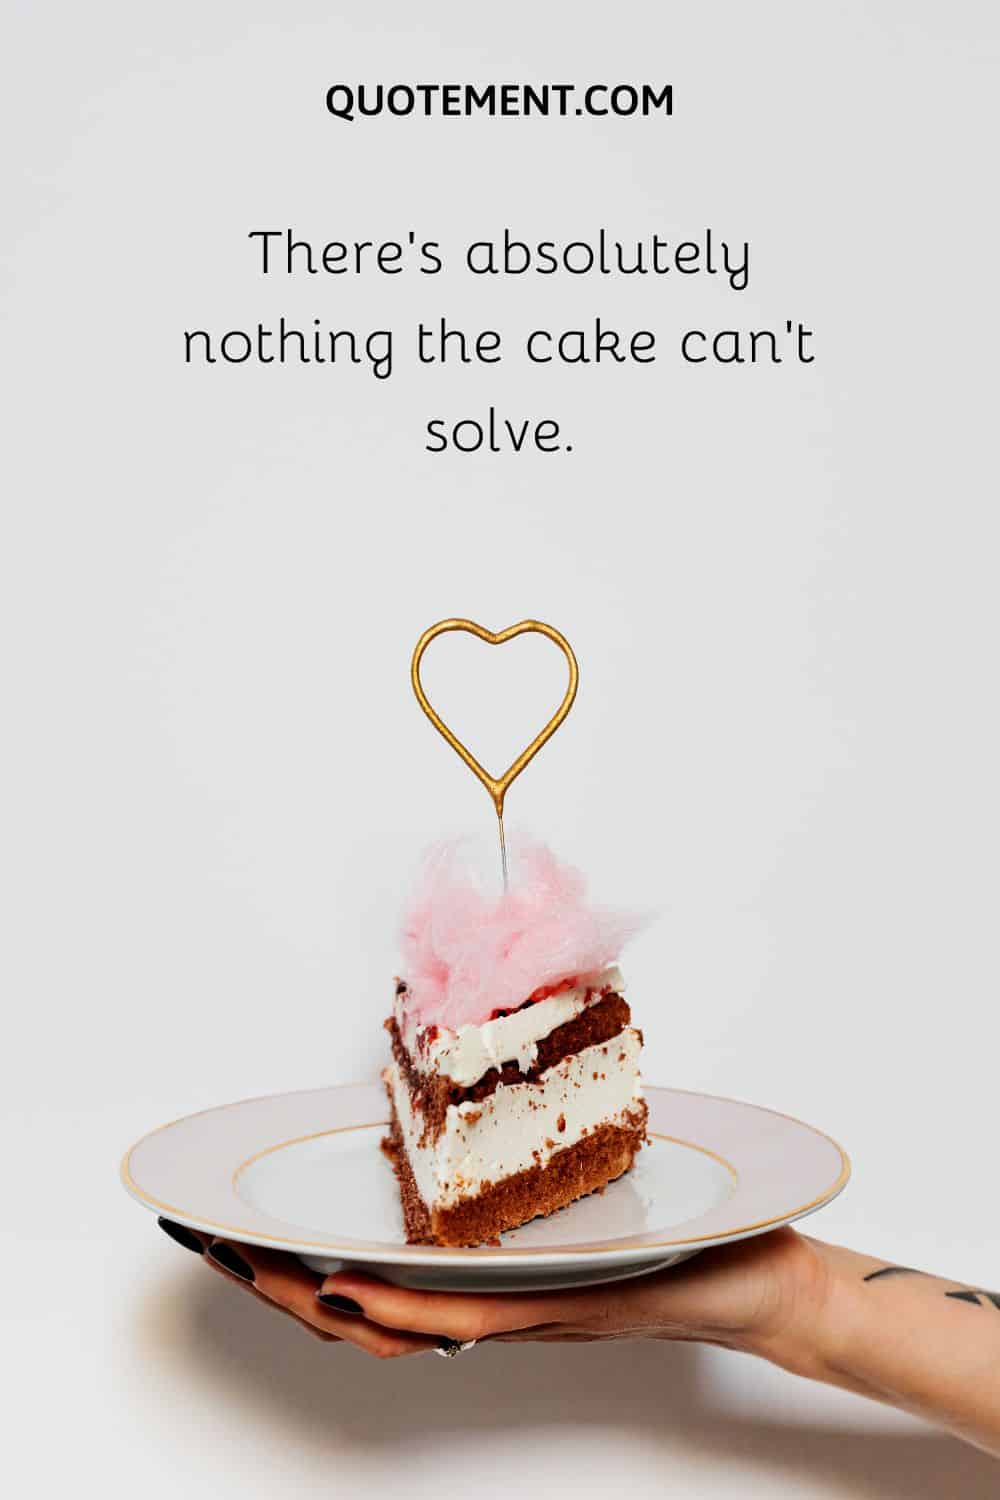 There’s absolutely nothing the cake can’t solve.